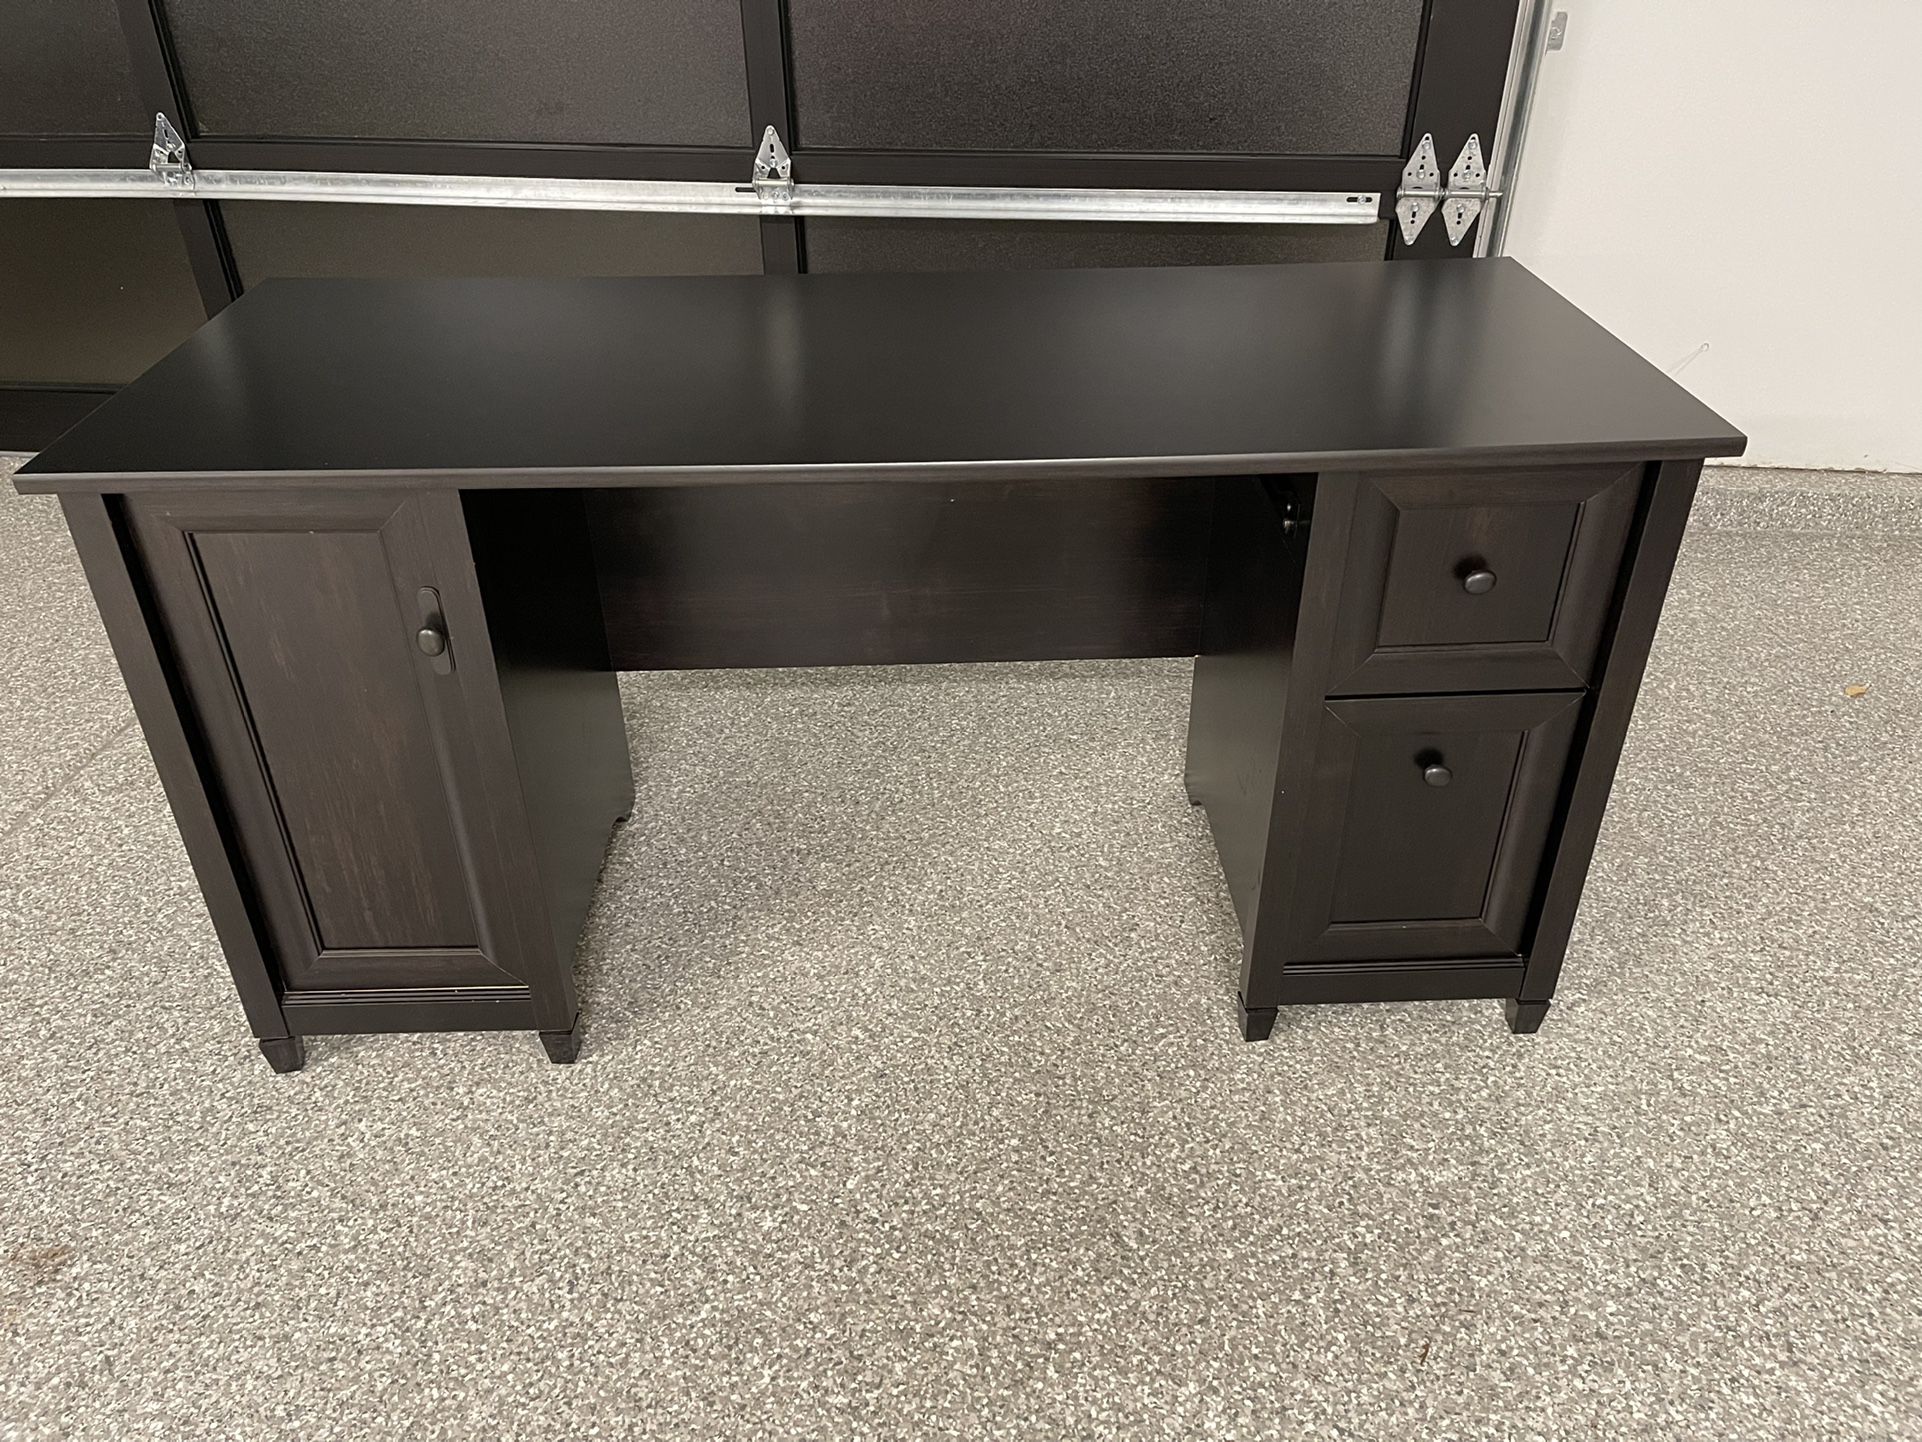 Excellent condition, barely used black computer desk